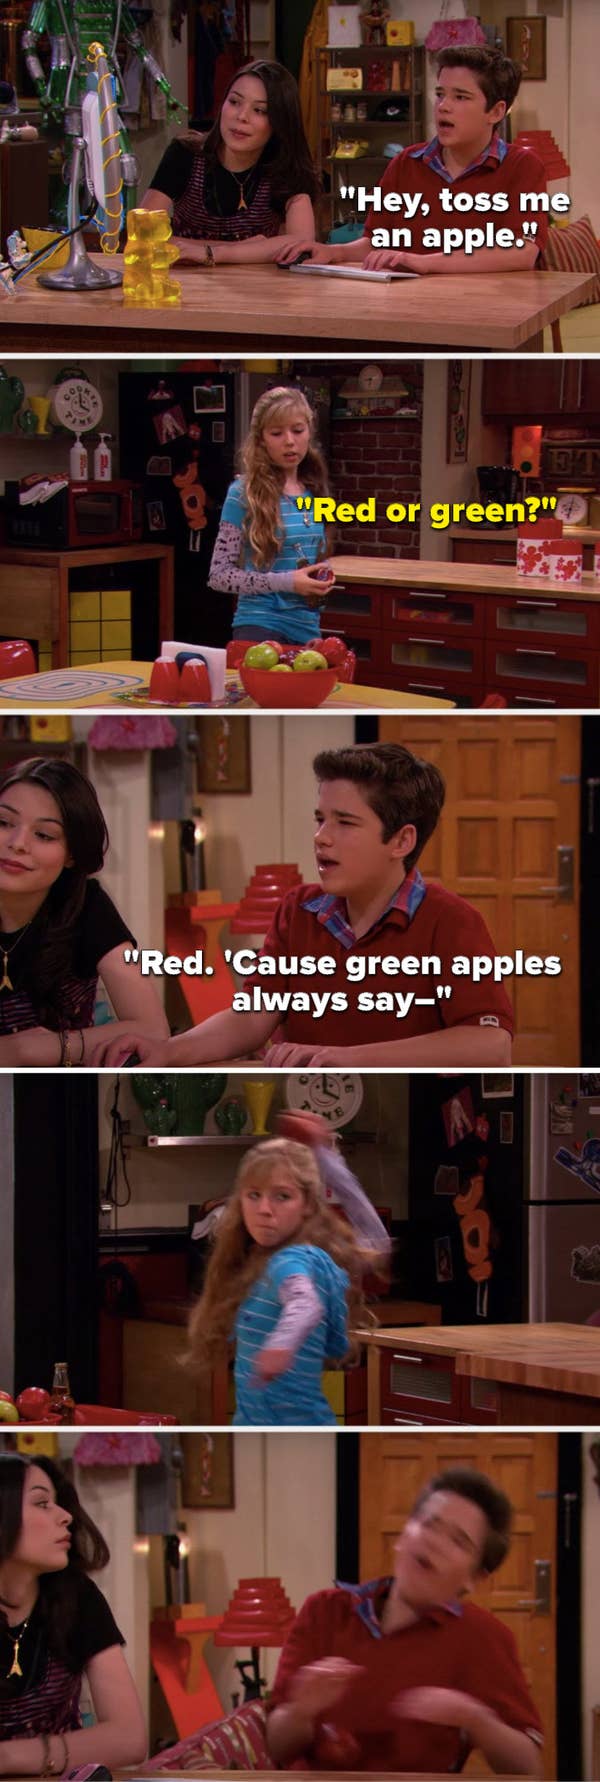 Freddie says, &quot;Hey, toss me an apple,&quot; Sam asks, &quot;Red or green,&quot; Freddie says, &quot;Red, 'cause green apples always say–&quot; and Sam throws a red apple at him and hits him in the face